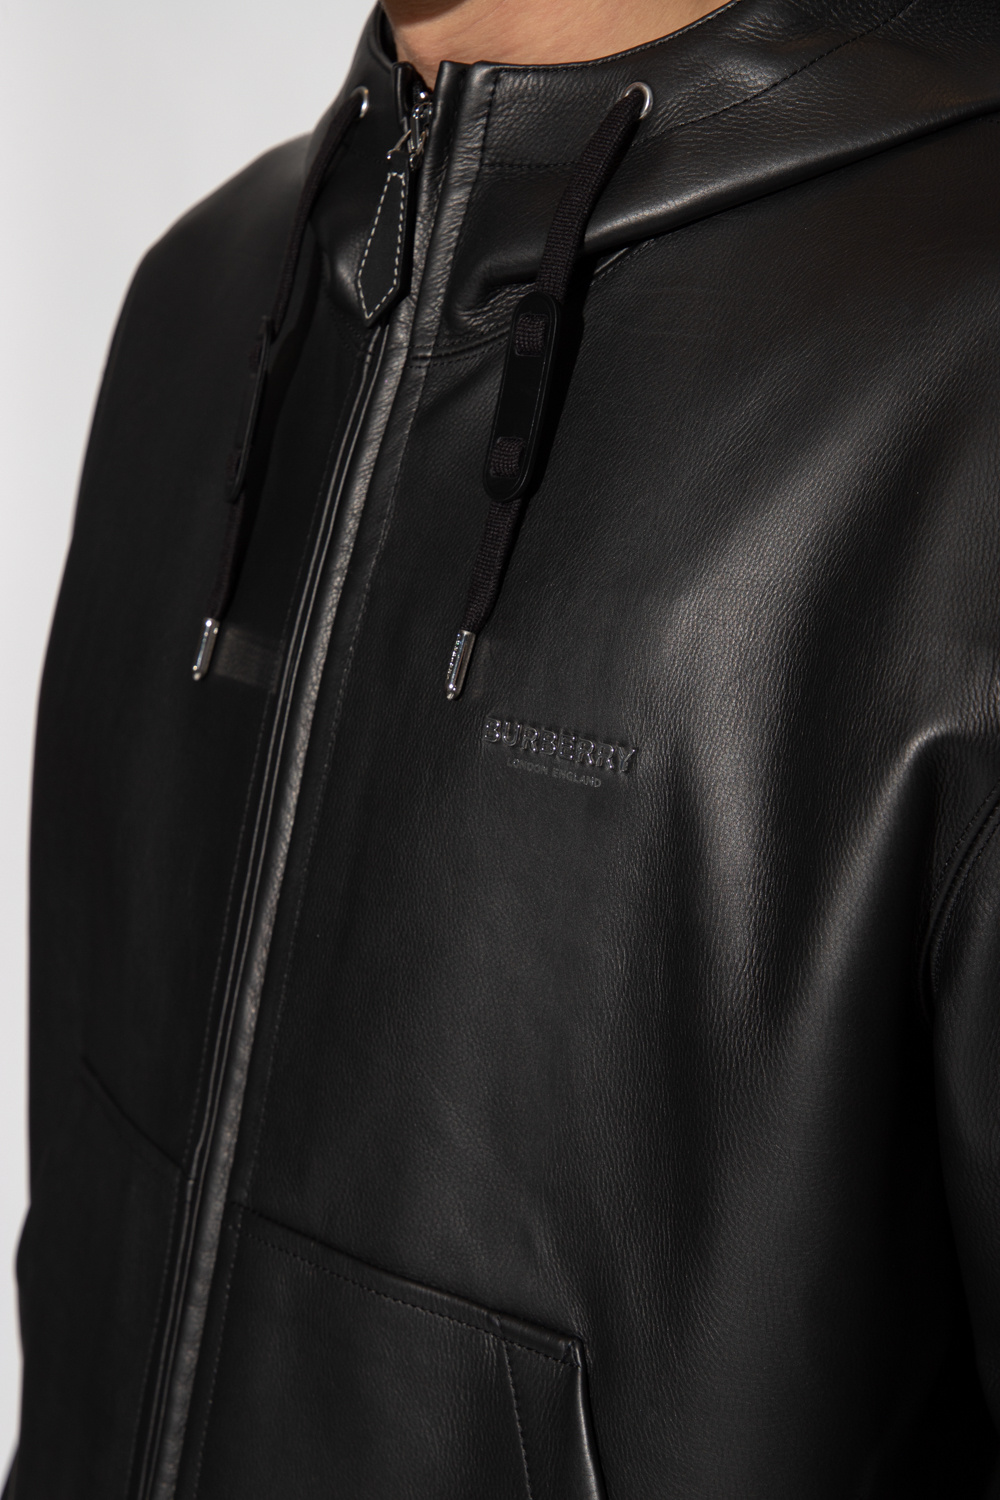 burberry Jogger ‘Shepley’ hooded leather jacket